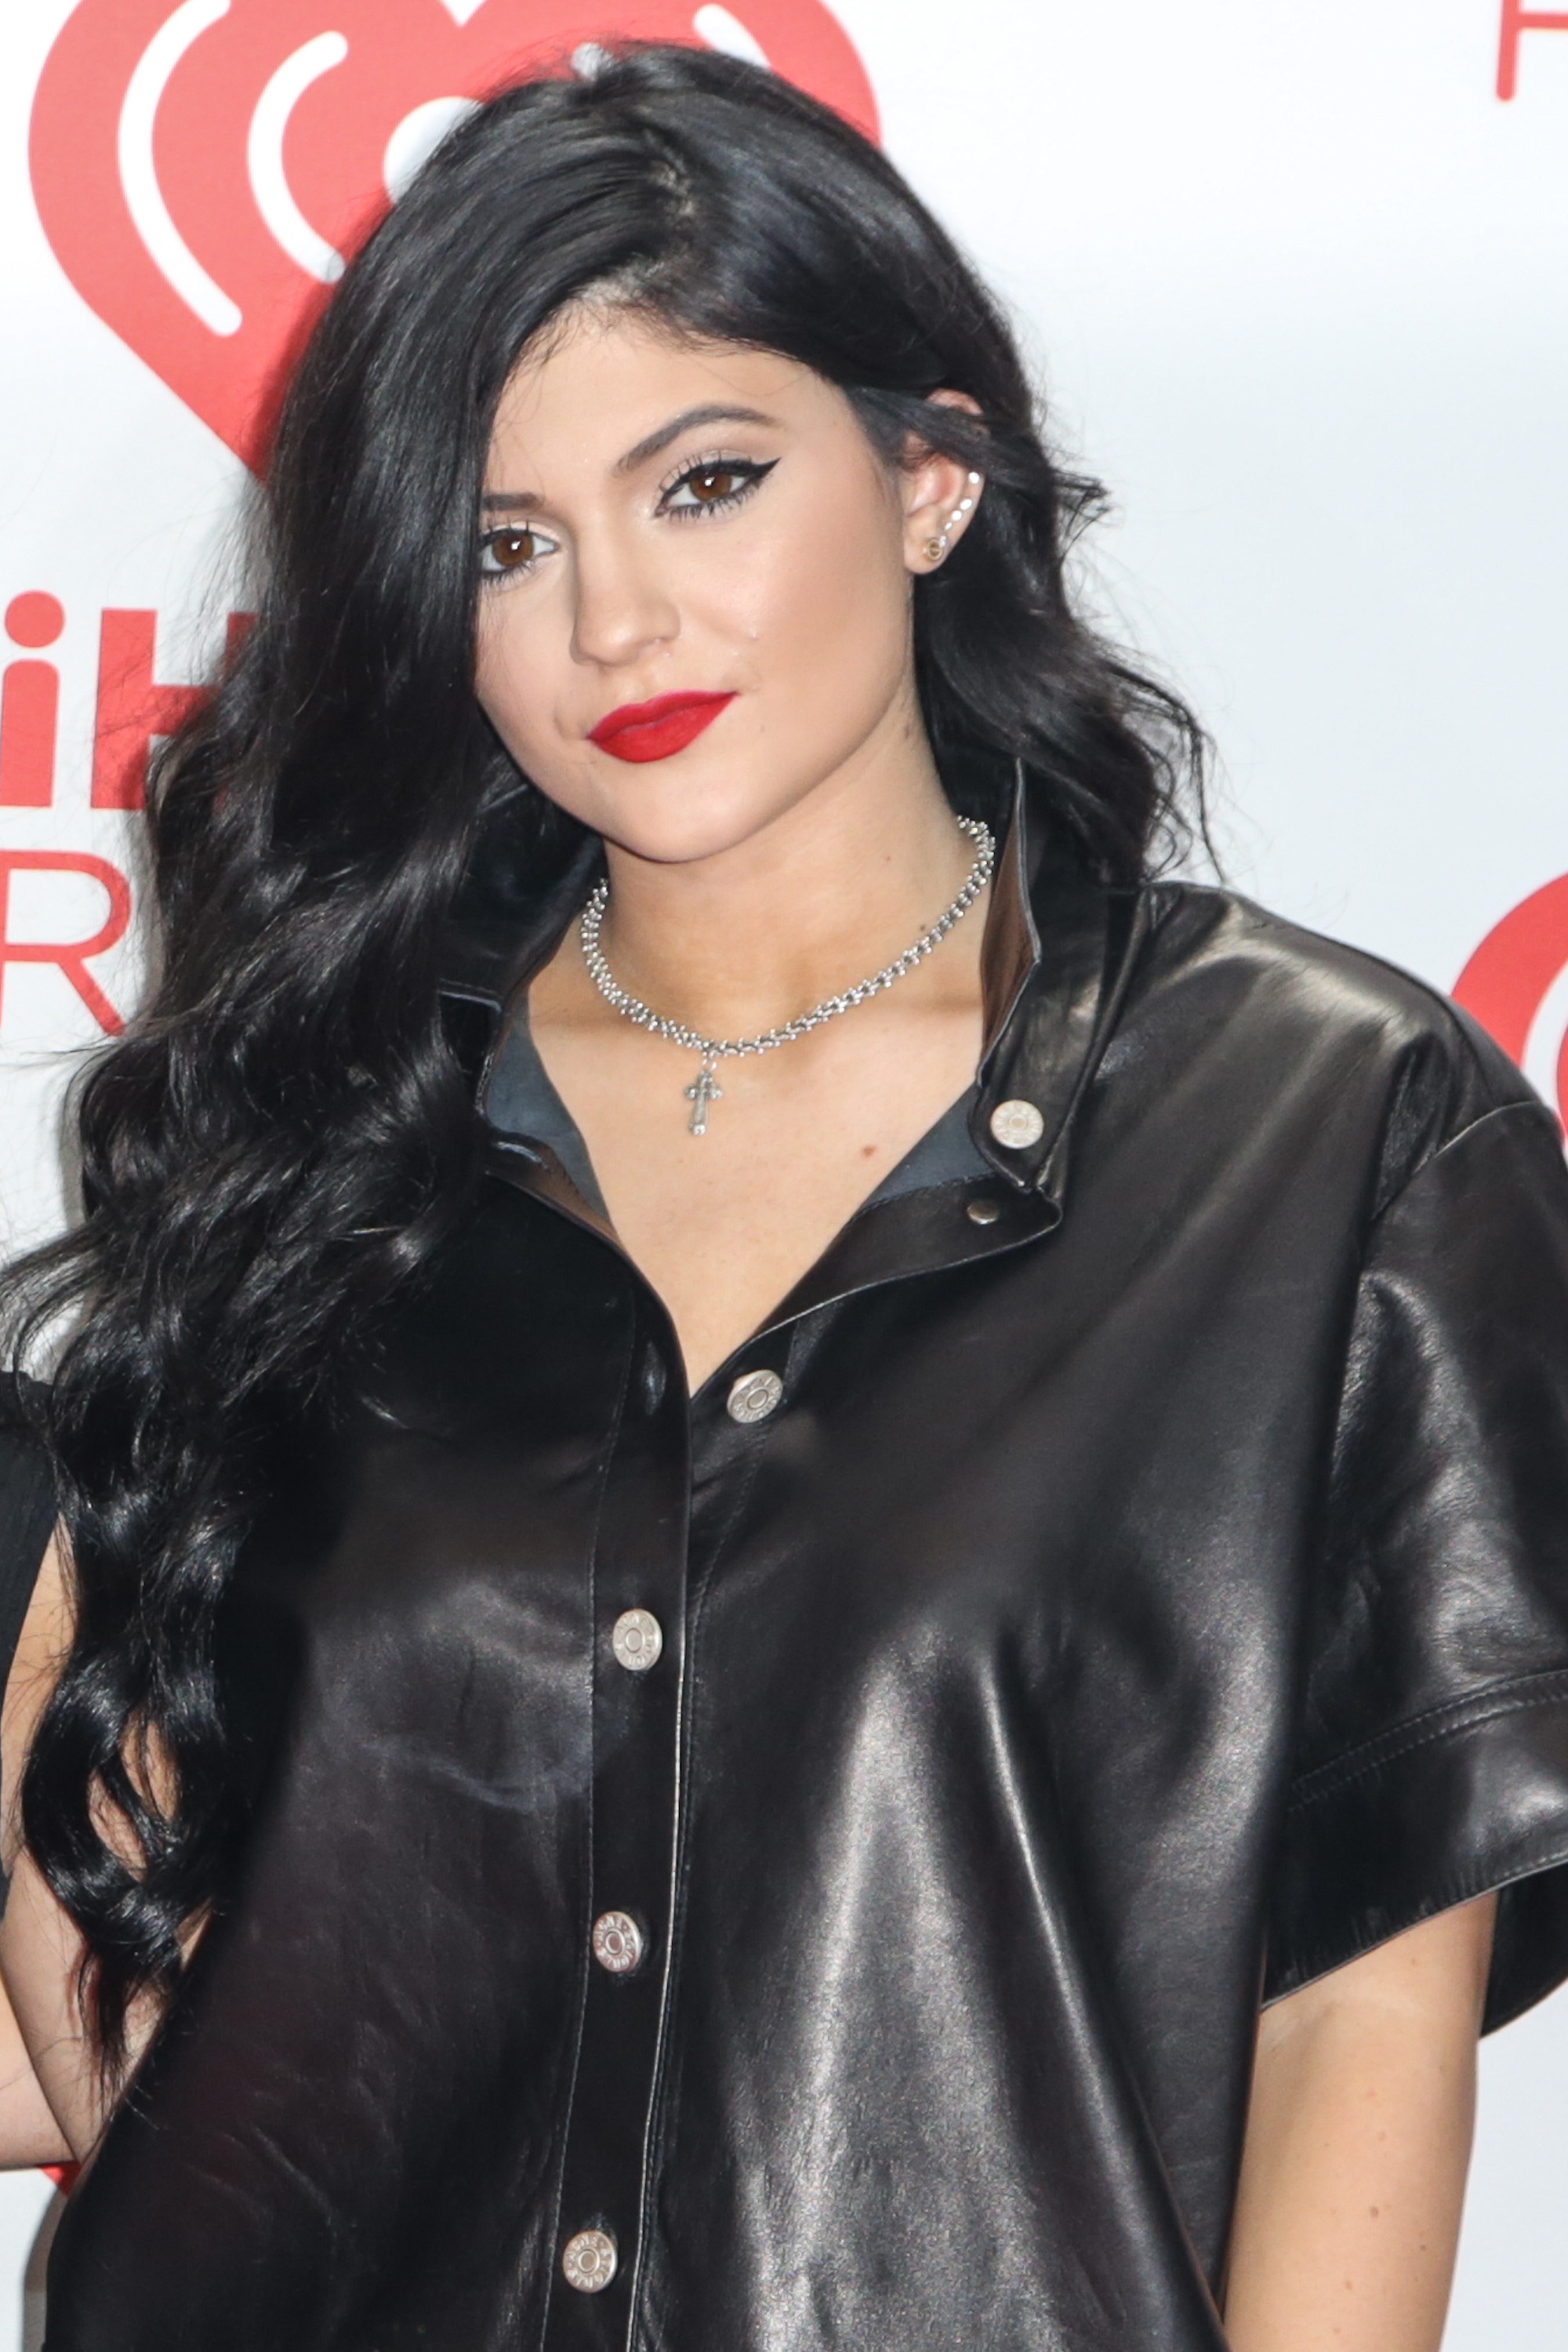 Kylie Jenner at the iHeartRadio music festival on September 21, 2013, in Las Vegas, Nevada. | Source: Getty Images